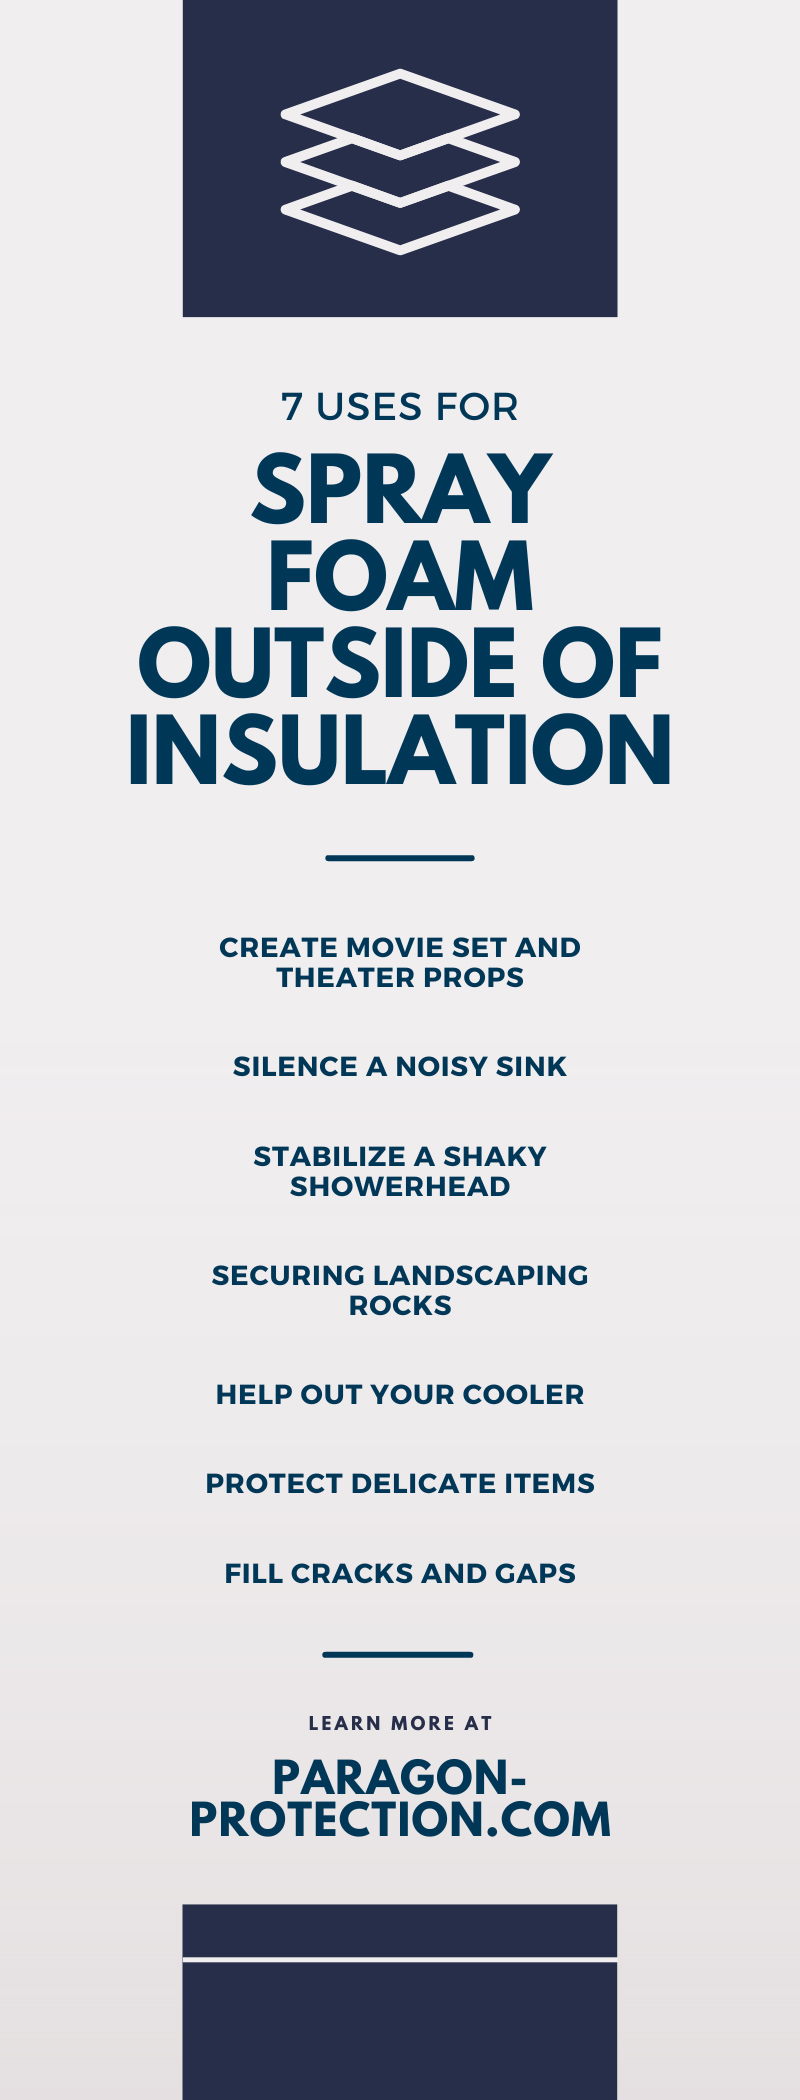 7 Uses for Spray Foam Outside of Insulation